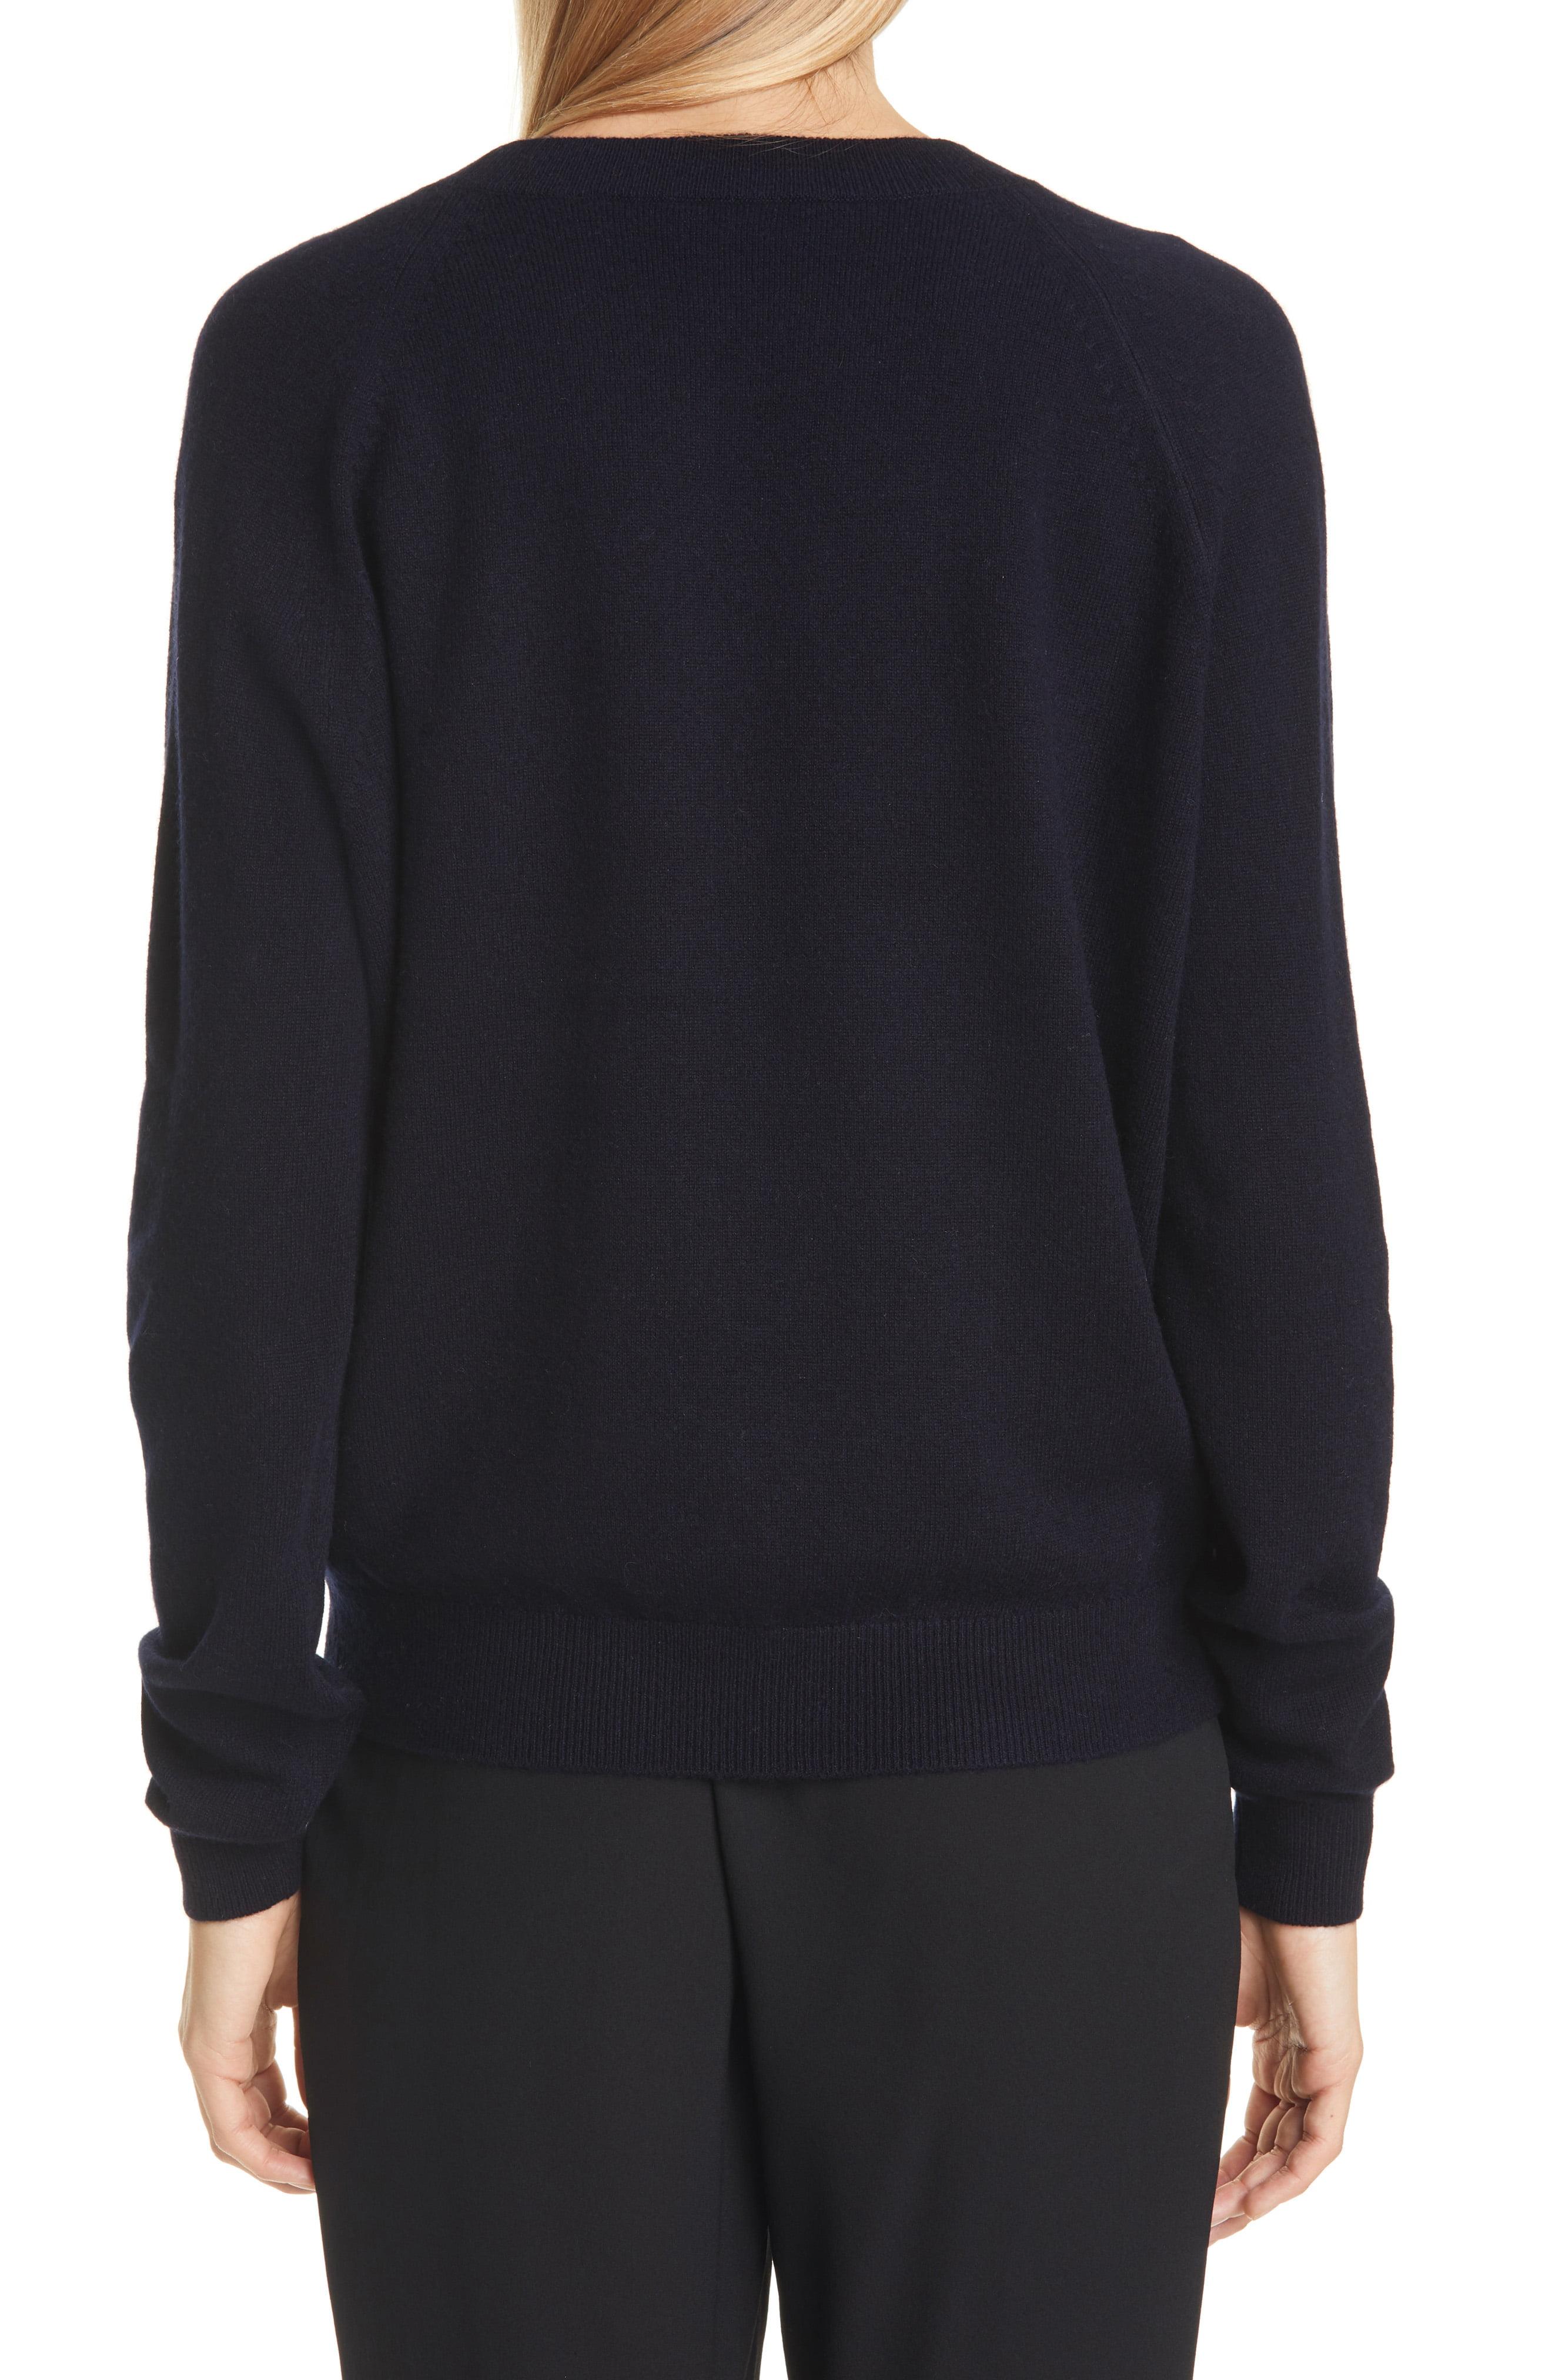 Vince Crewneck Wool & Cashmere Sweater in Blue - Lyst